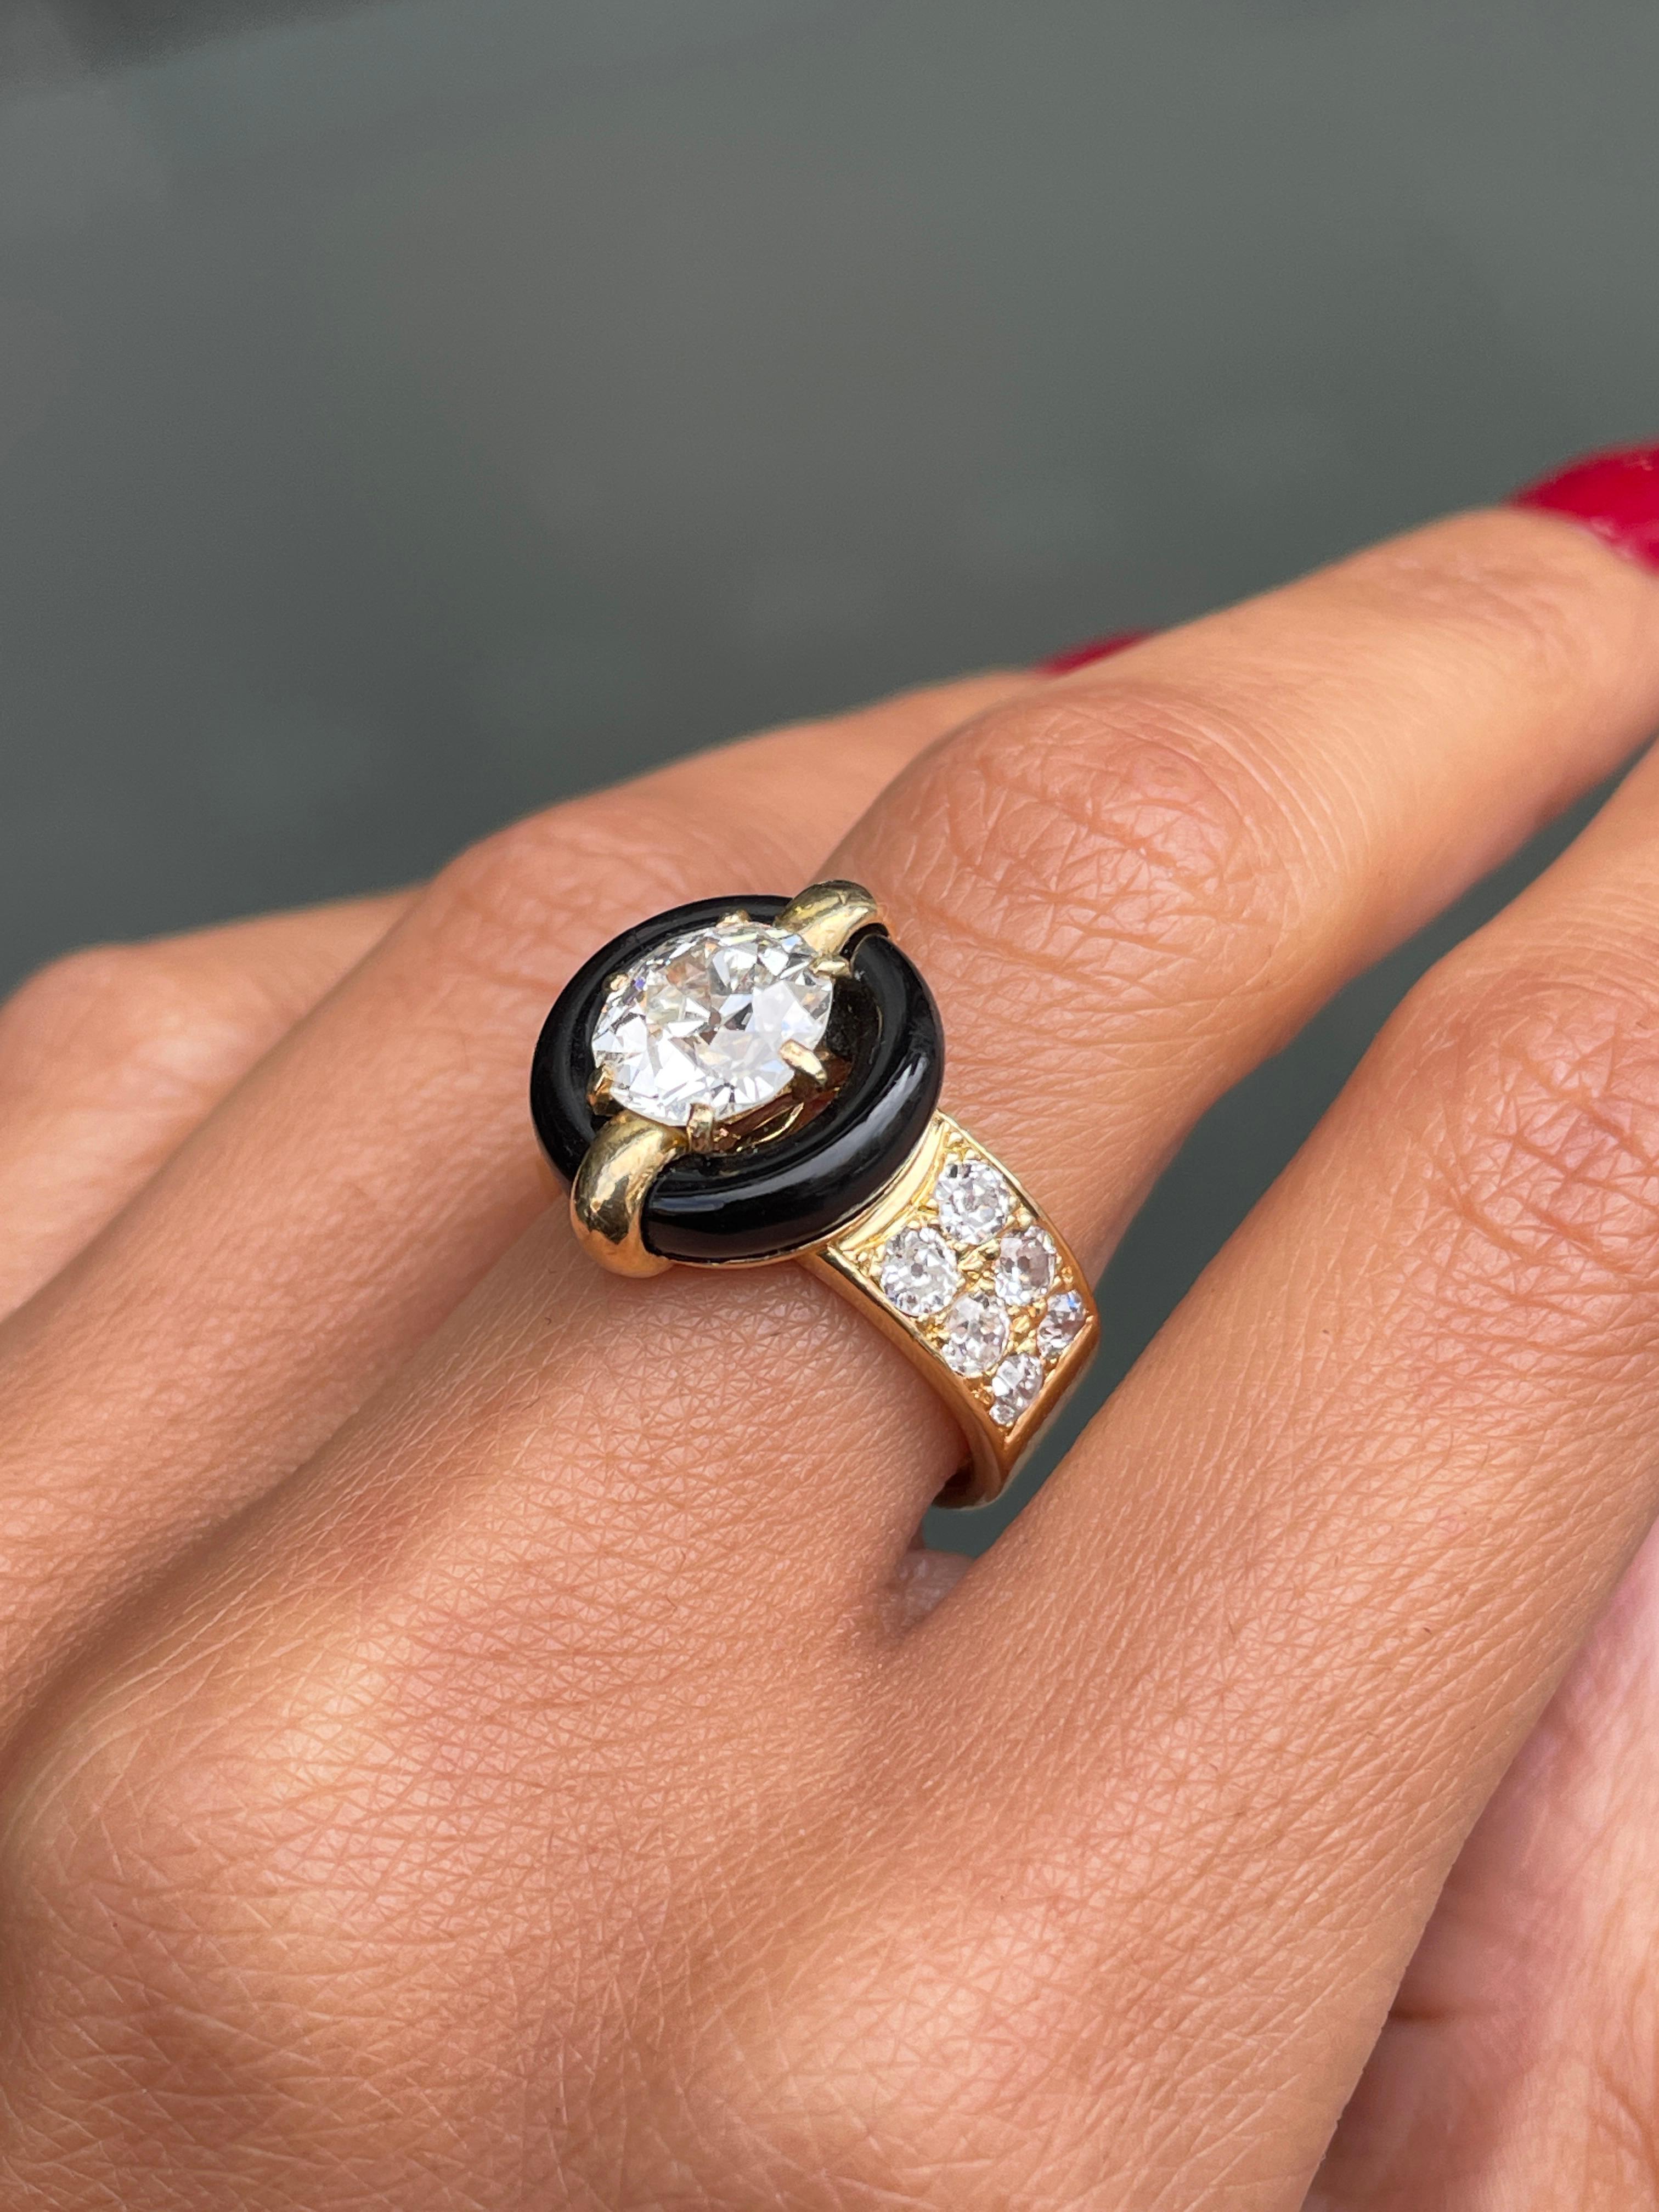 Vintage Montres Mauboussin 1.84ct Old Cut Diamond and Onyx 18K Gold Ring, French In Good Condition For Sale In London, GB